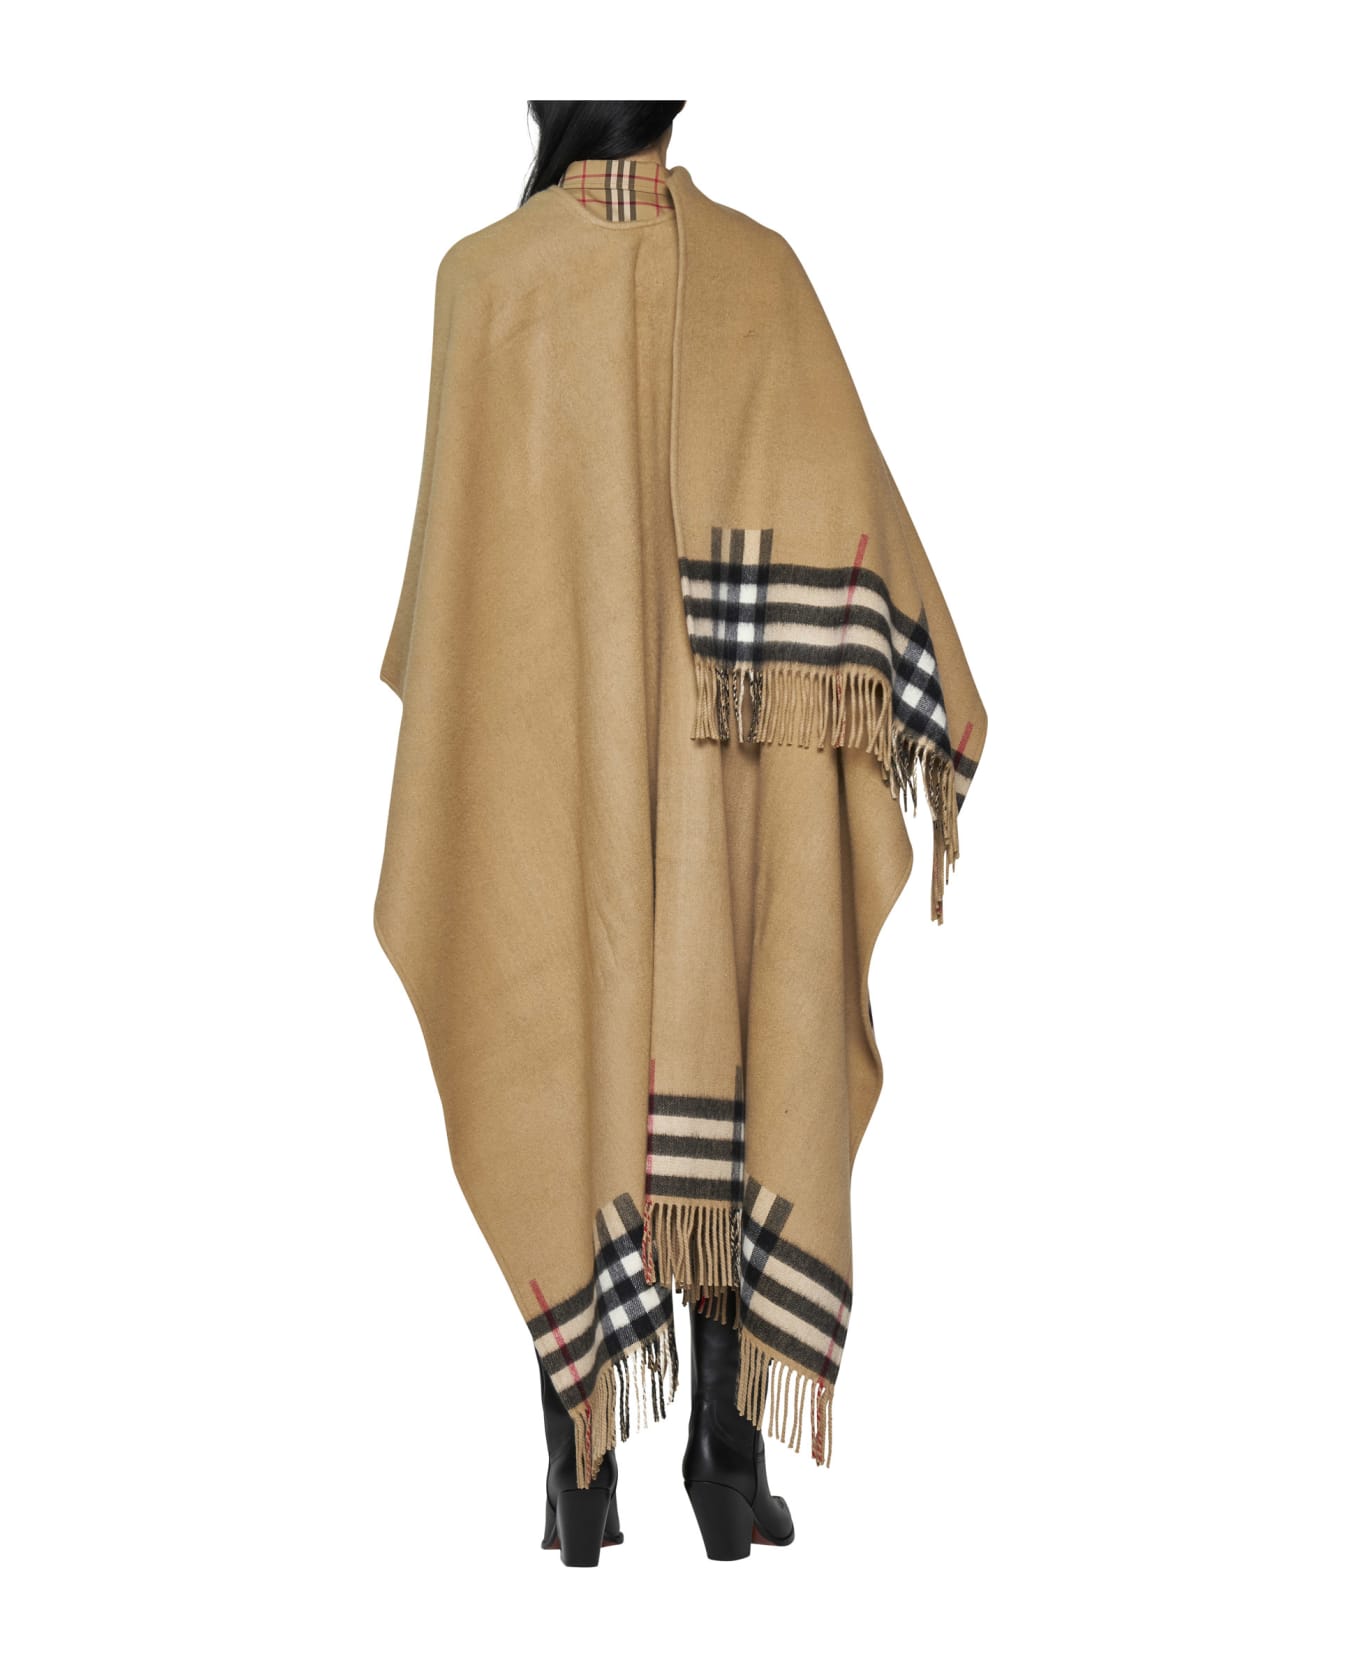 Burberry Scarf - Archive beige